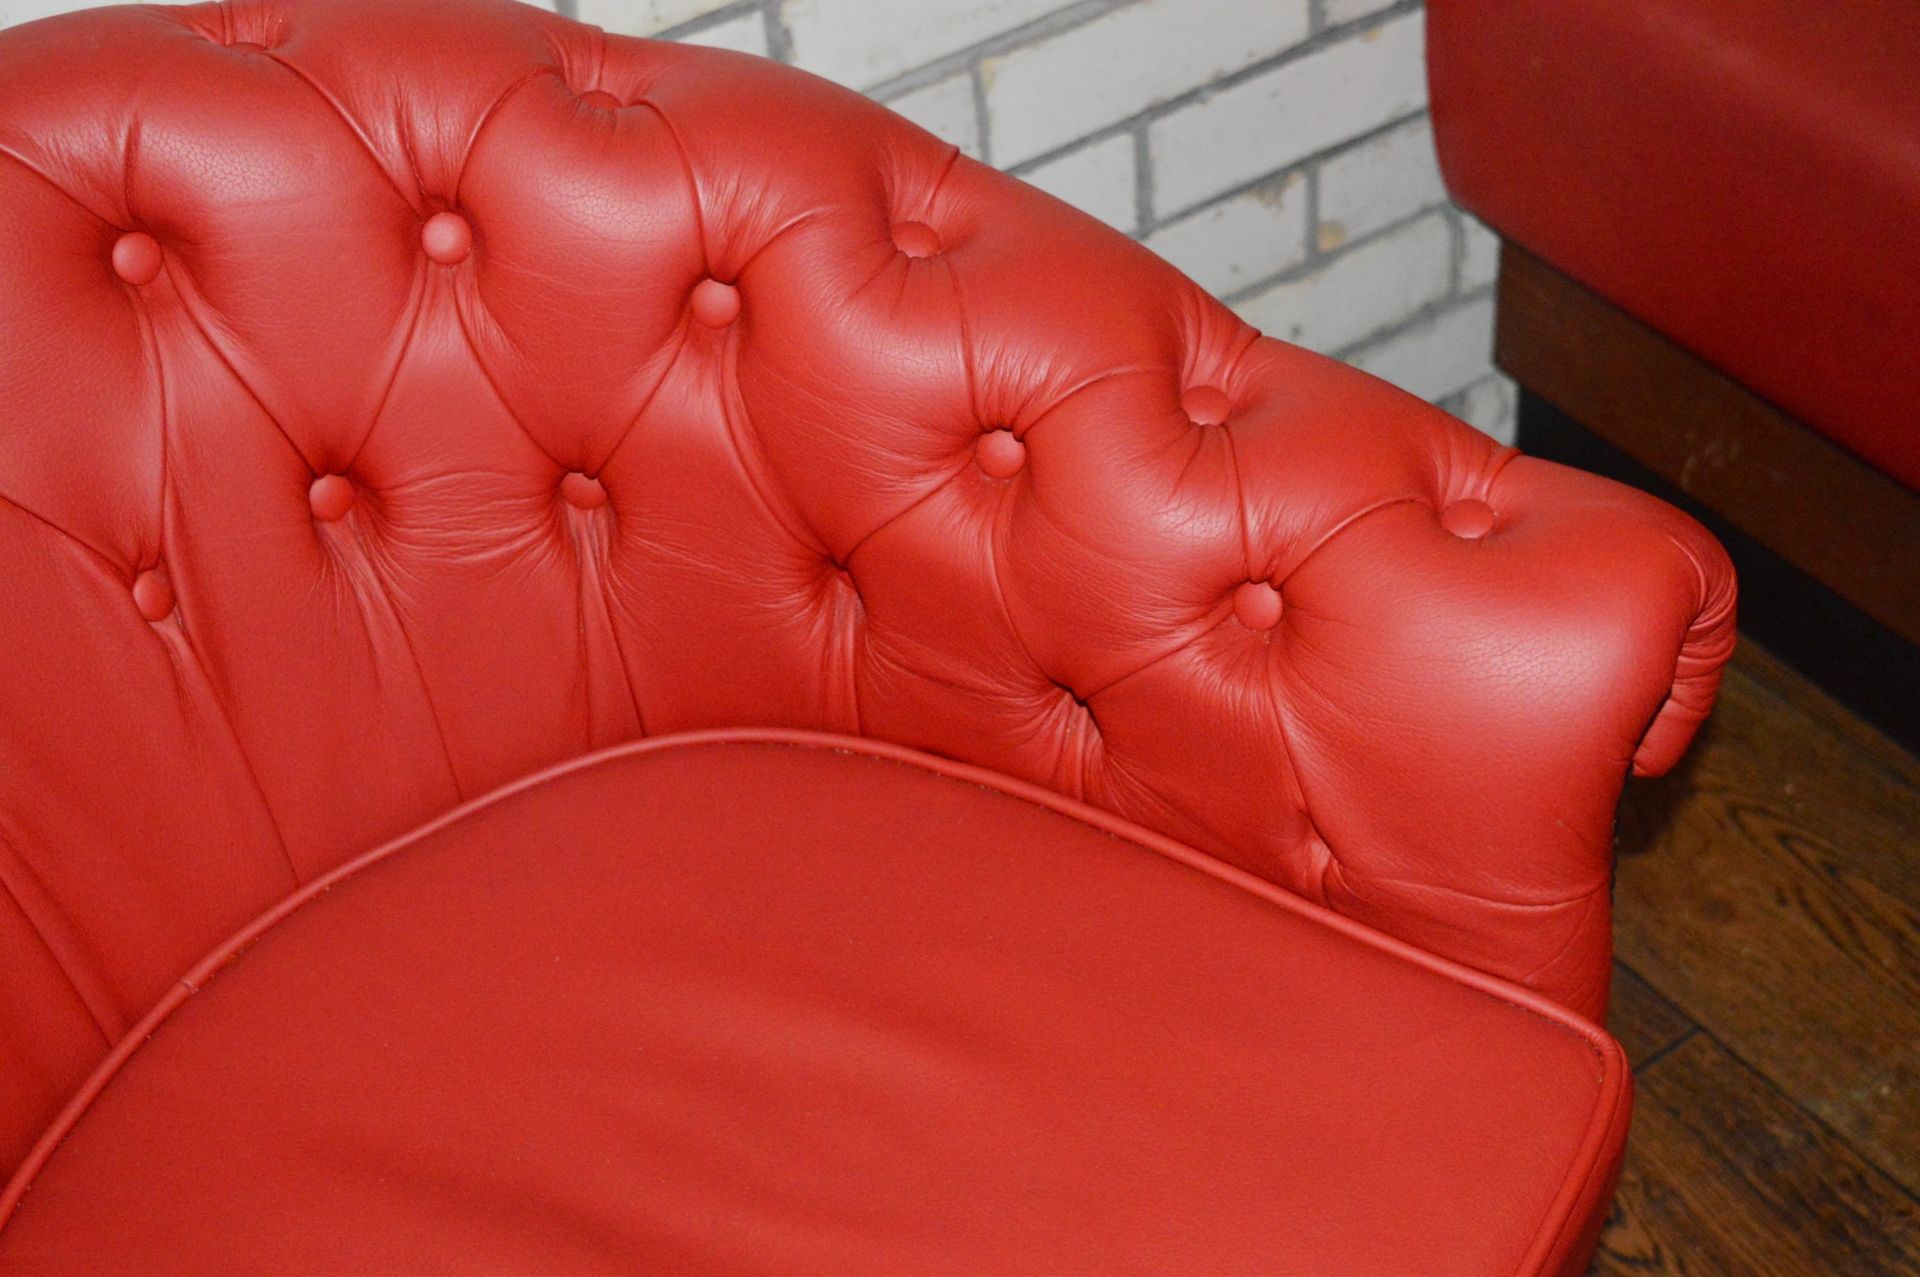 1 x Chesterfield Style Buttoned Back Red Leather Tub Chair With Hardwood Legs Finished in an - Image 6 of 8